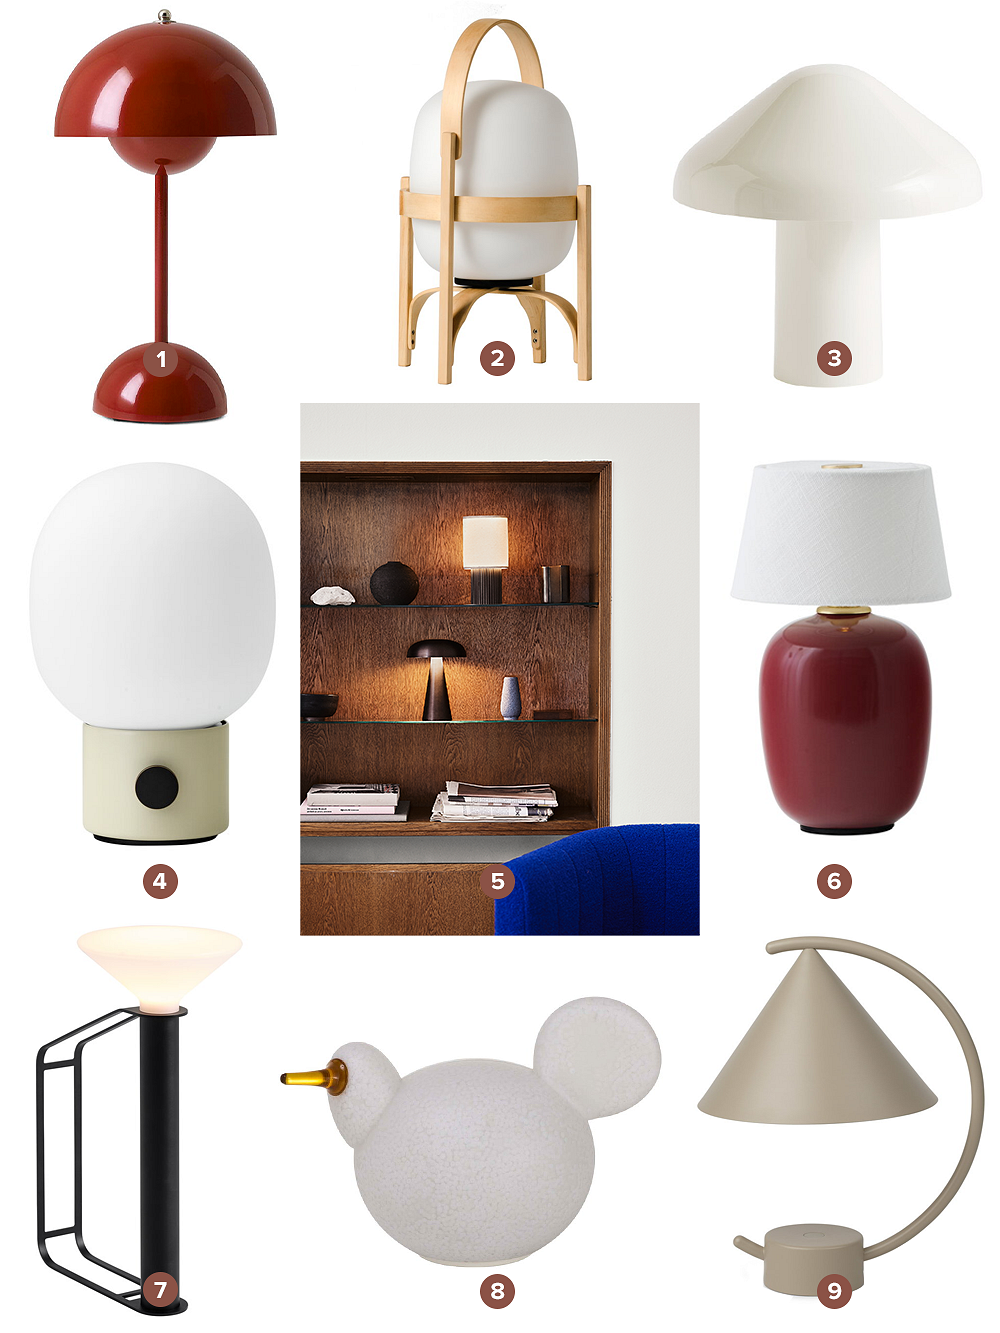 A collage image featuring different cordless lamps.